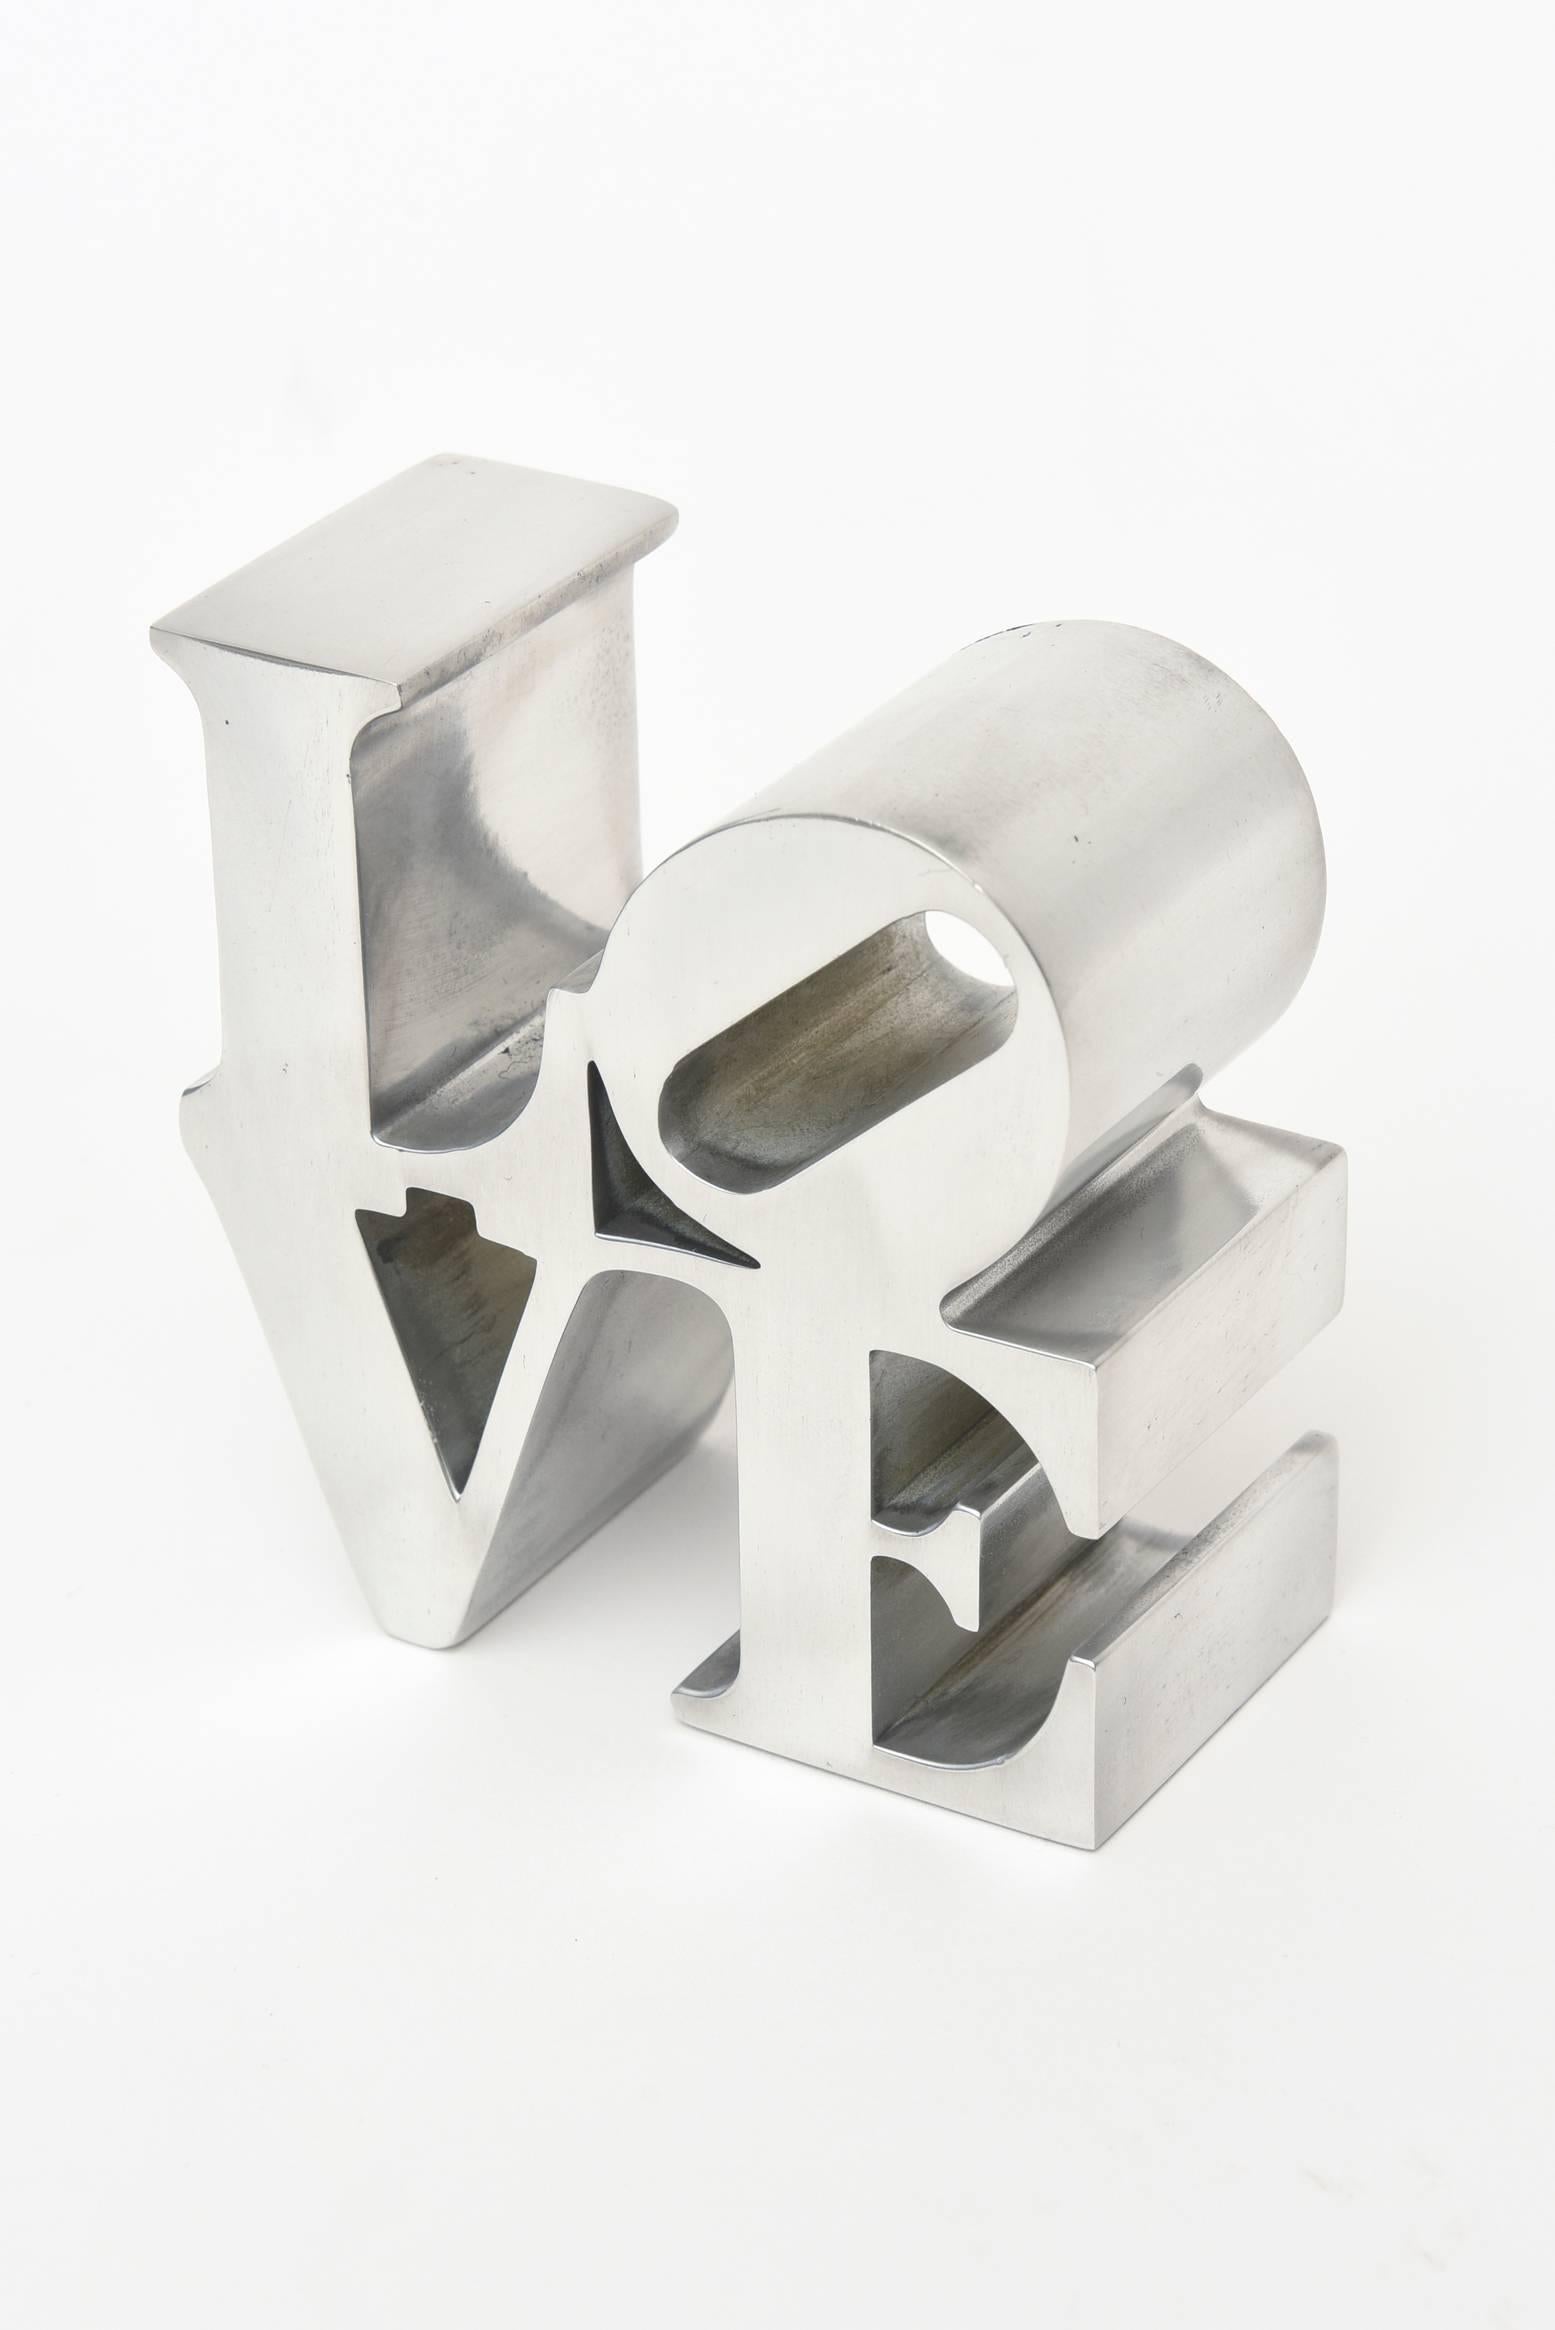 This polished aluminium love paperweight/ desk sculpture by Robert Indiana is from the 1970s.
Robert Indiana became famous for his love sculptures and paintings.
It was originally sold in museum stores such as MOMA at that time.
At this time in